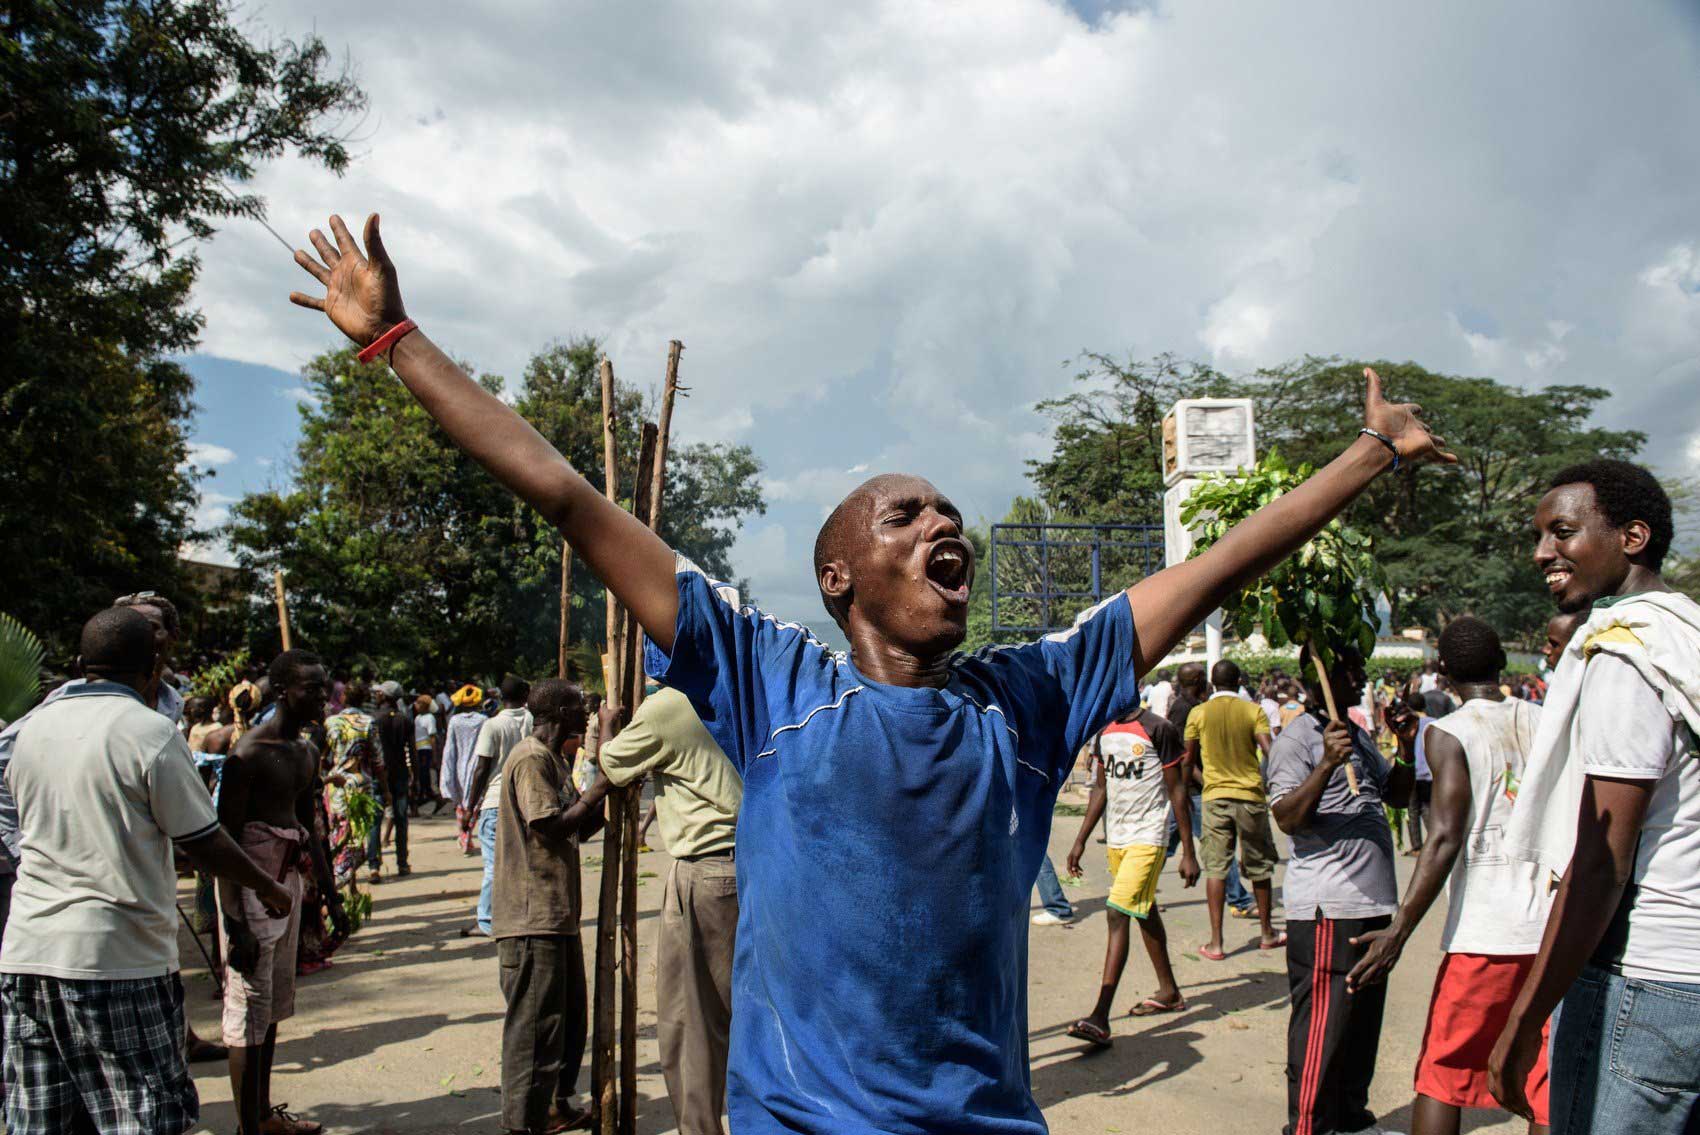 A man raises his arms as people celebrate in the streets of Bujumbura following the radio announcement by Major General Godefroid Niyombare that President Nkurunziza was overthrown, on May 13, 2015.